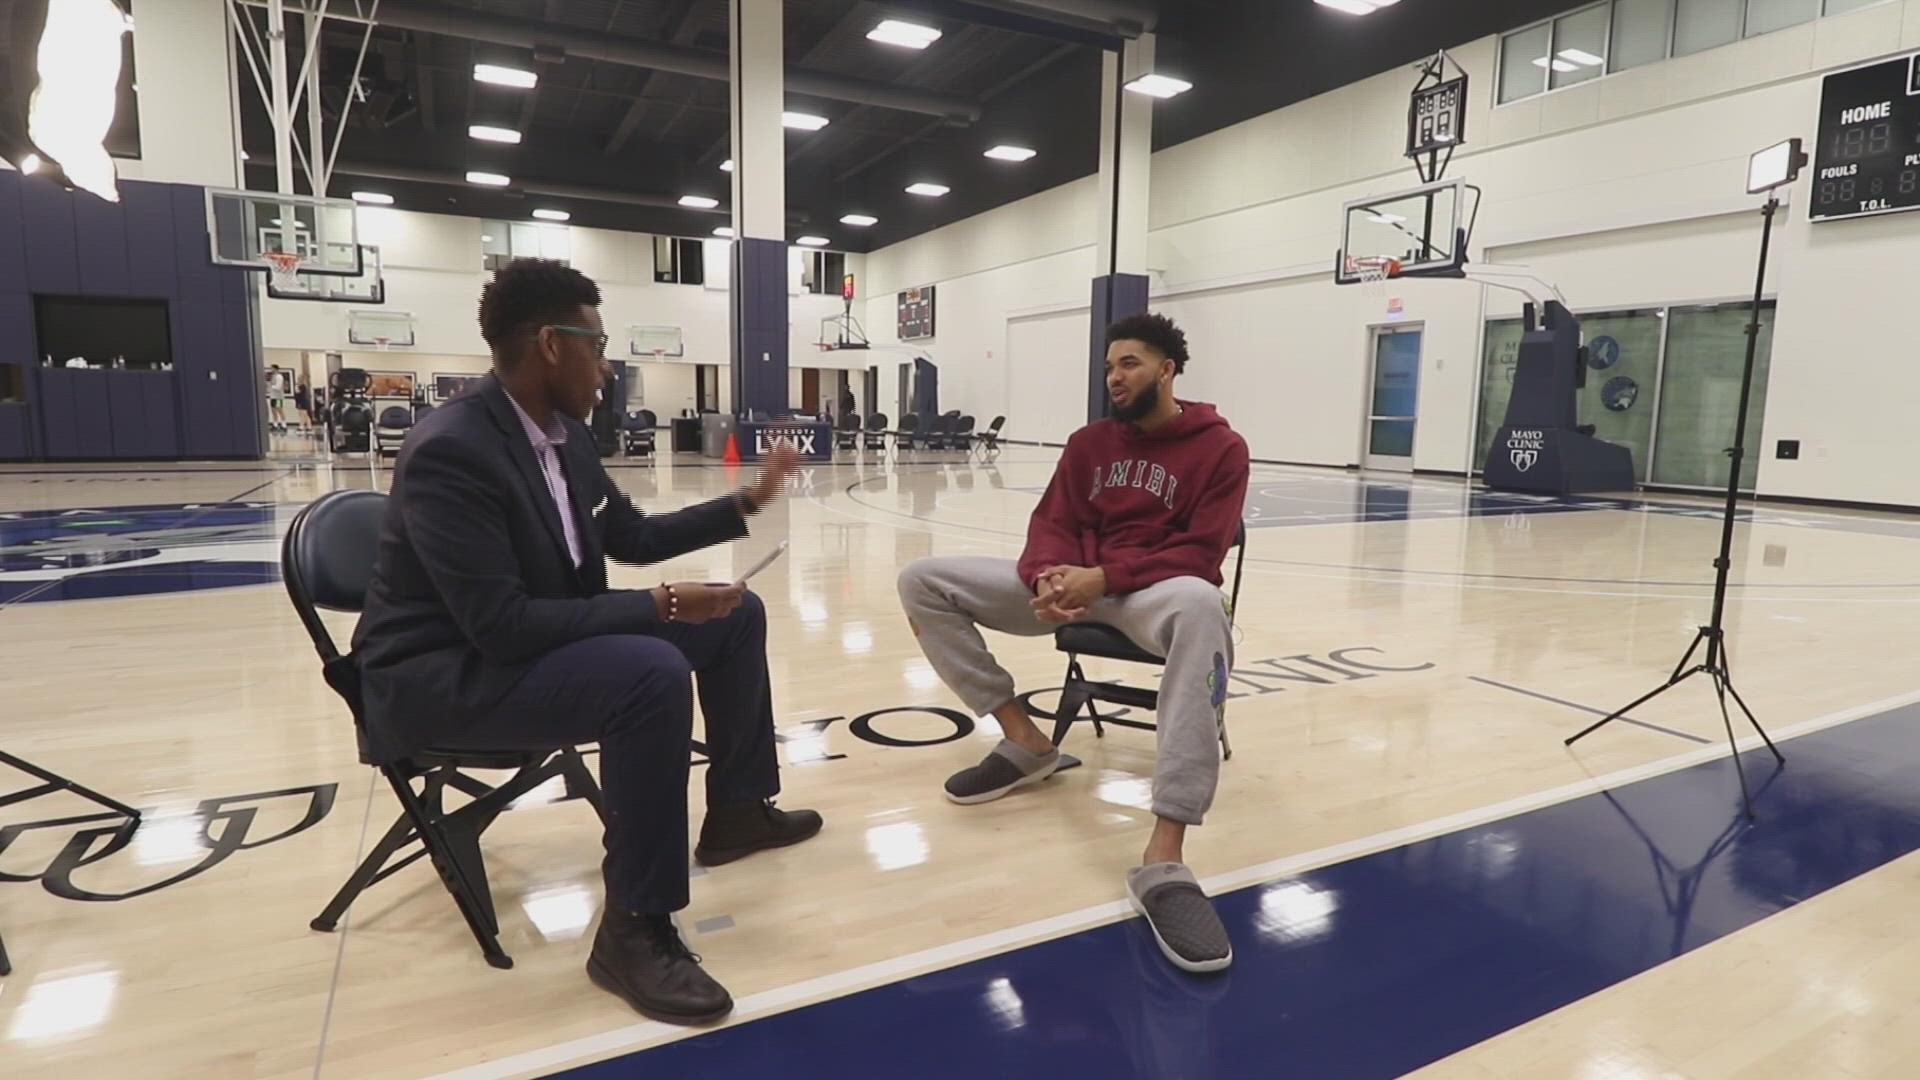 Timberwolves star Karl-Anthony Towns sat down with KARE 11’s Reggie Wilson for a game of 11 questions, lightning-round style.